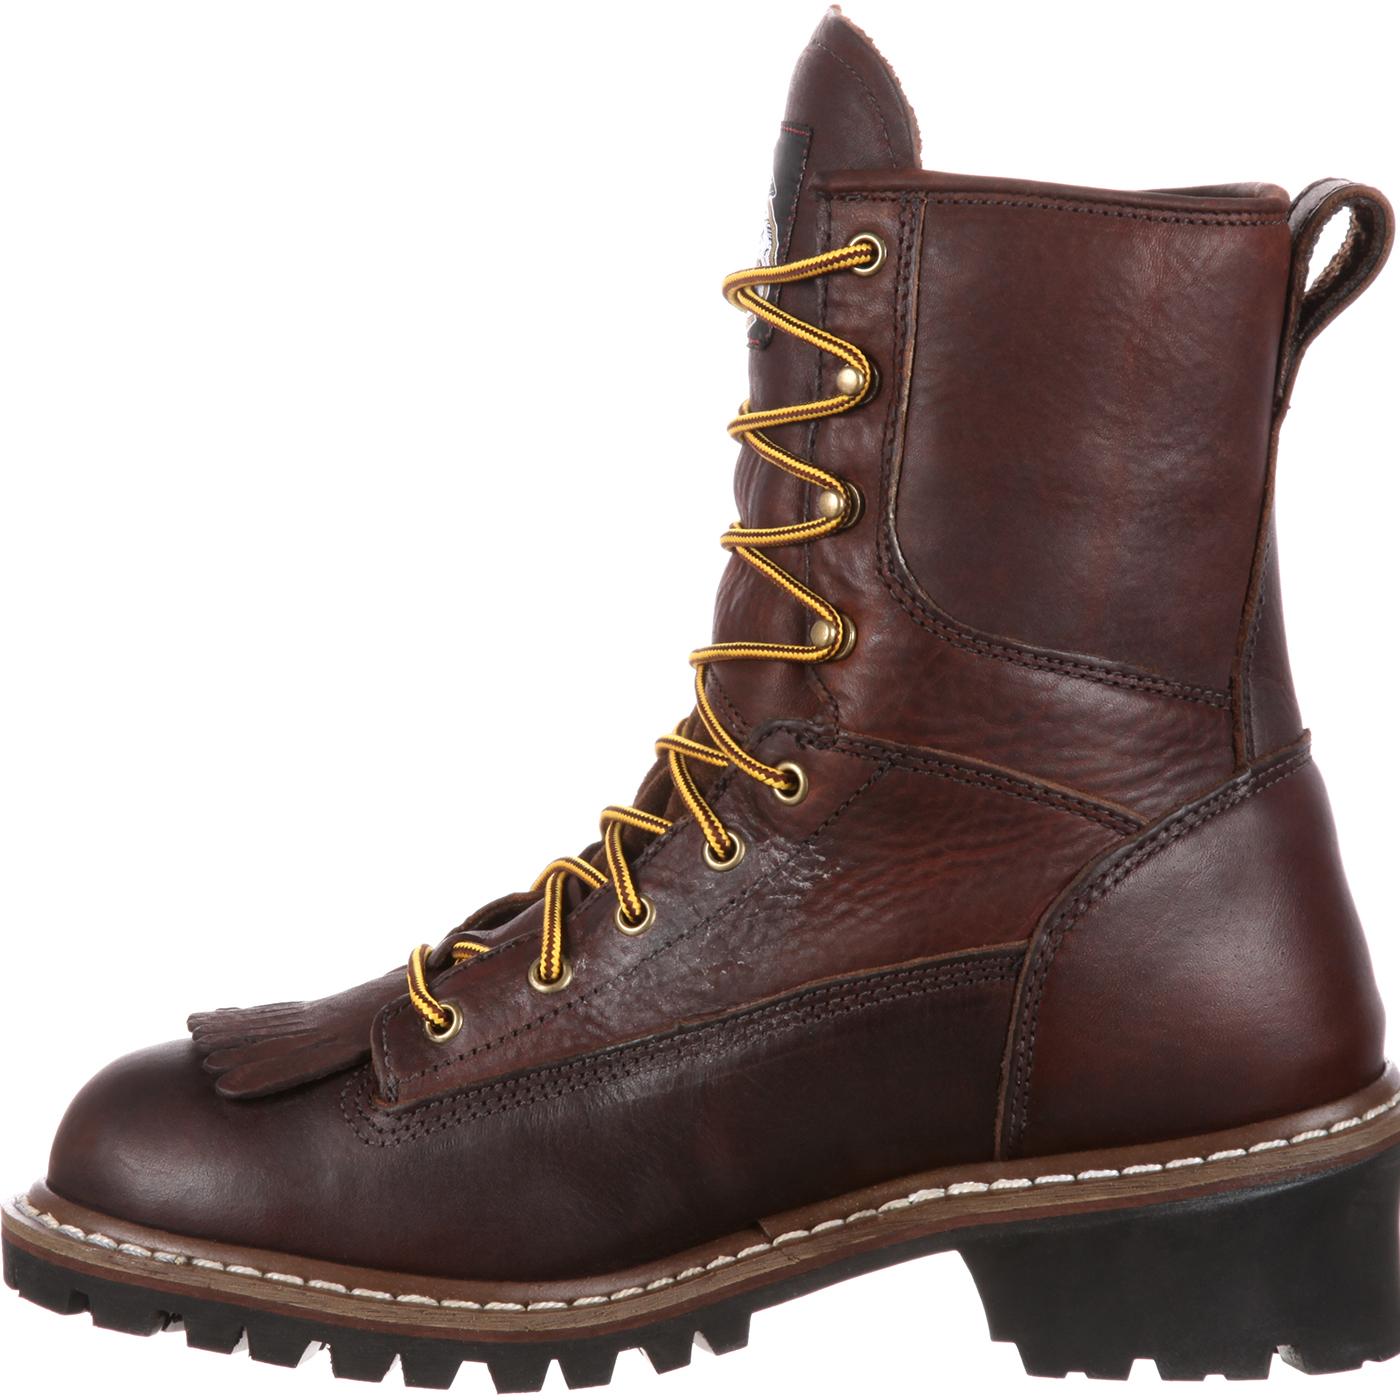 logger boot georgia waterproof boots mens footwear shoes lehighoutfitters clothing